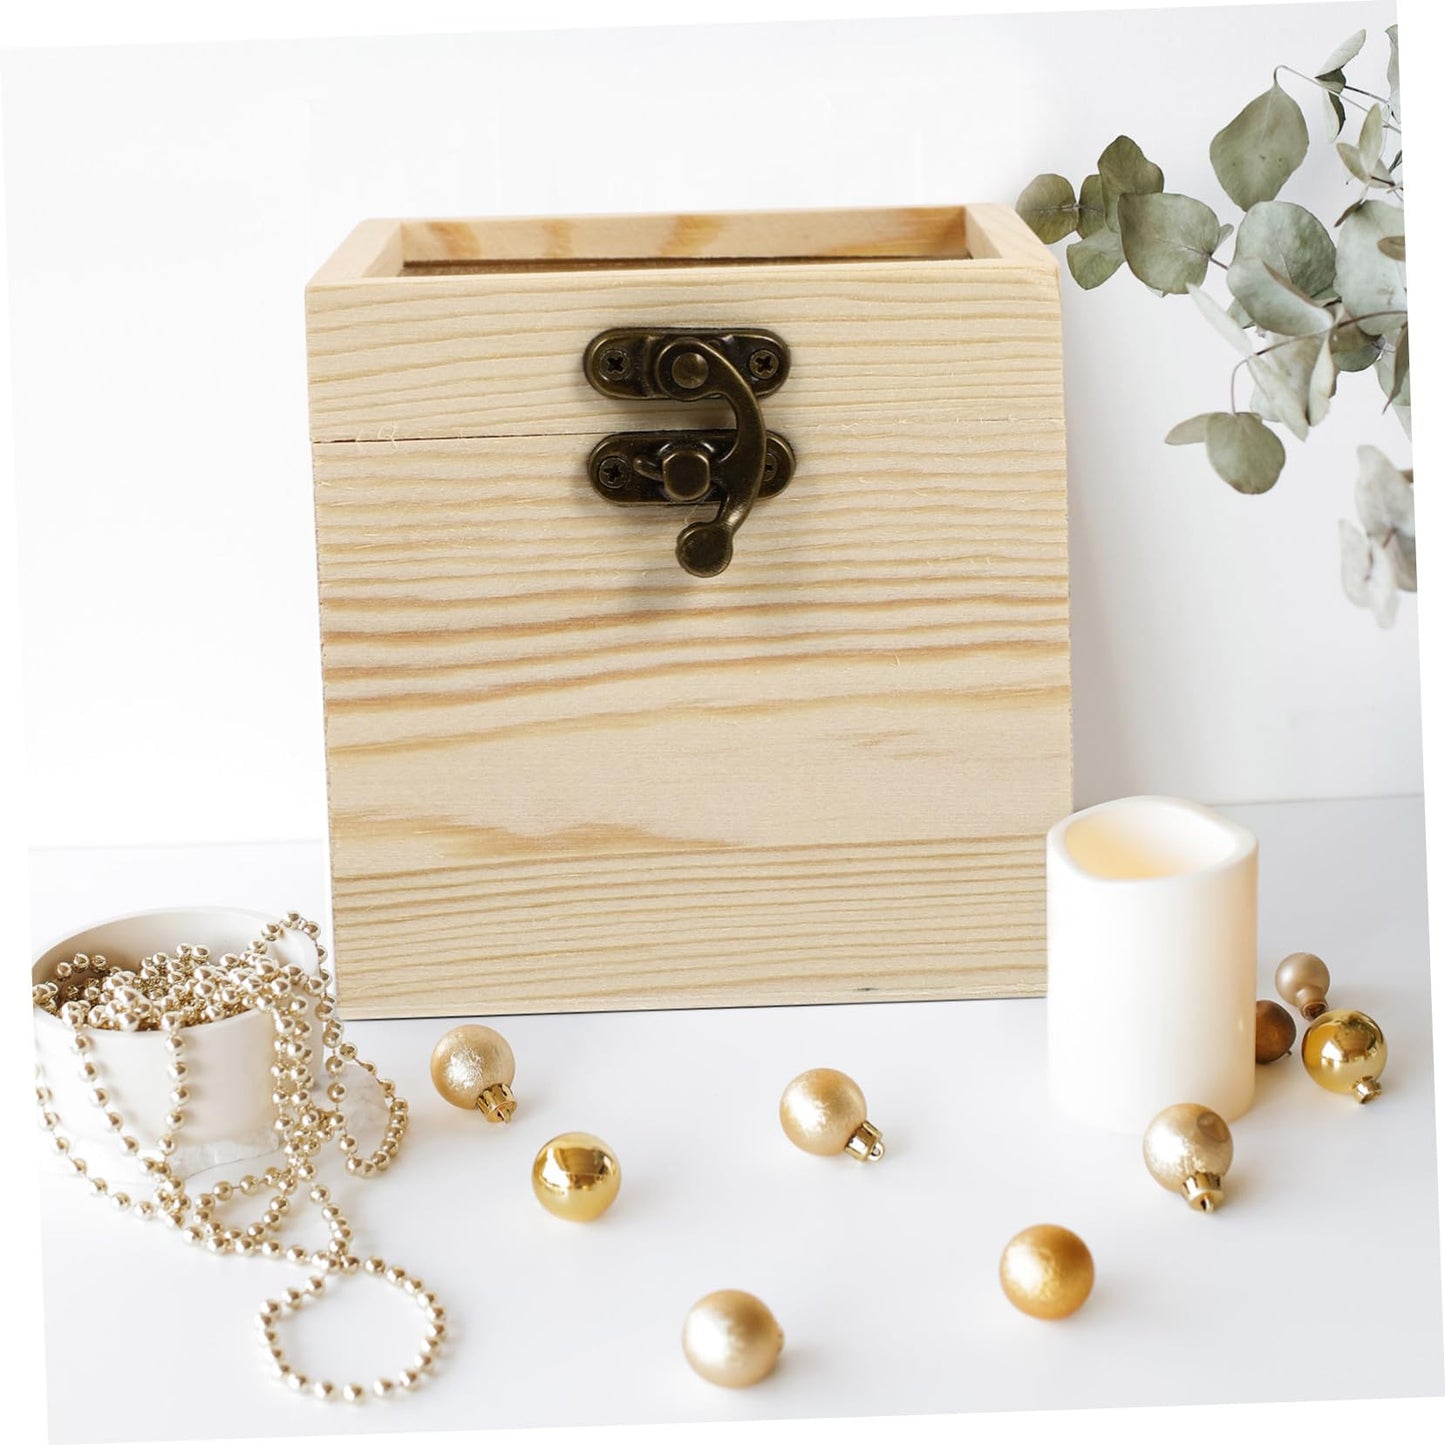 NOLITOY 4 Pcs Wooden Box with Glass Lid Candy Glass Jewelry Keepsake Unfinished Wooden Chest Jewelry Container Necklace Case Glass Container Flowers